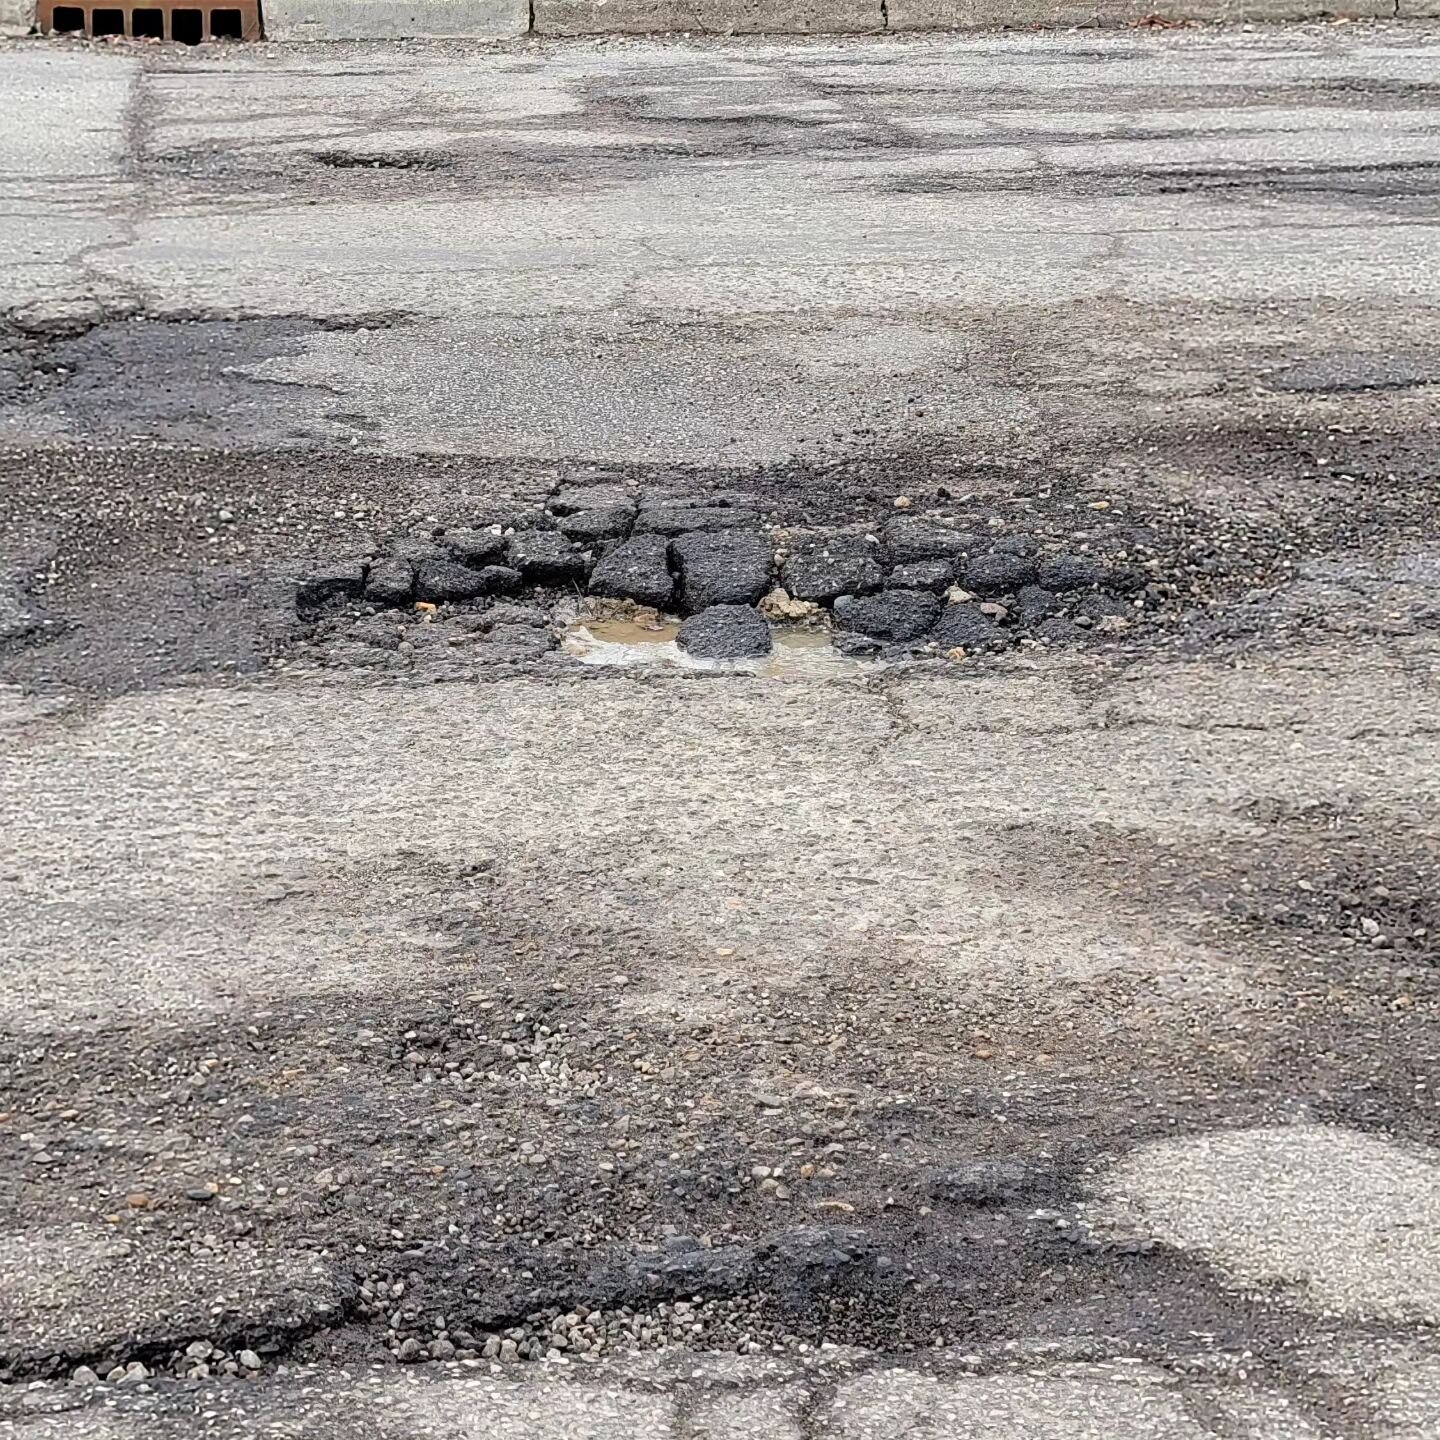 Pothole season in Indy! Please report all potholes through RequestIndy app or online. 
...
Yes, we could talk forever about the infrastructure inequality in Indiana. But until that gets fixed, just keep reporting and hold our officials accountable.